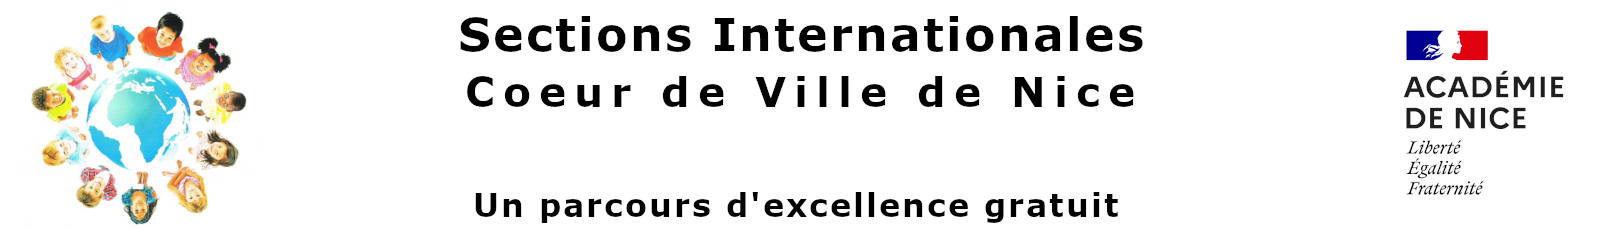 Sections Internationales